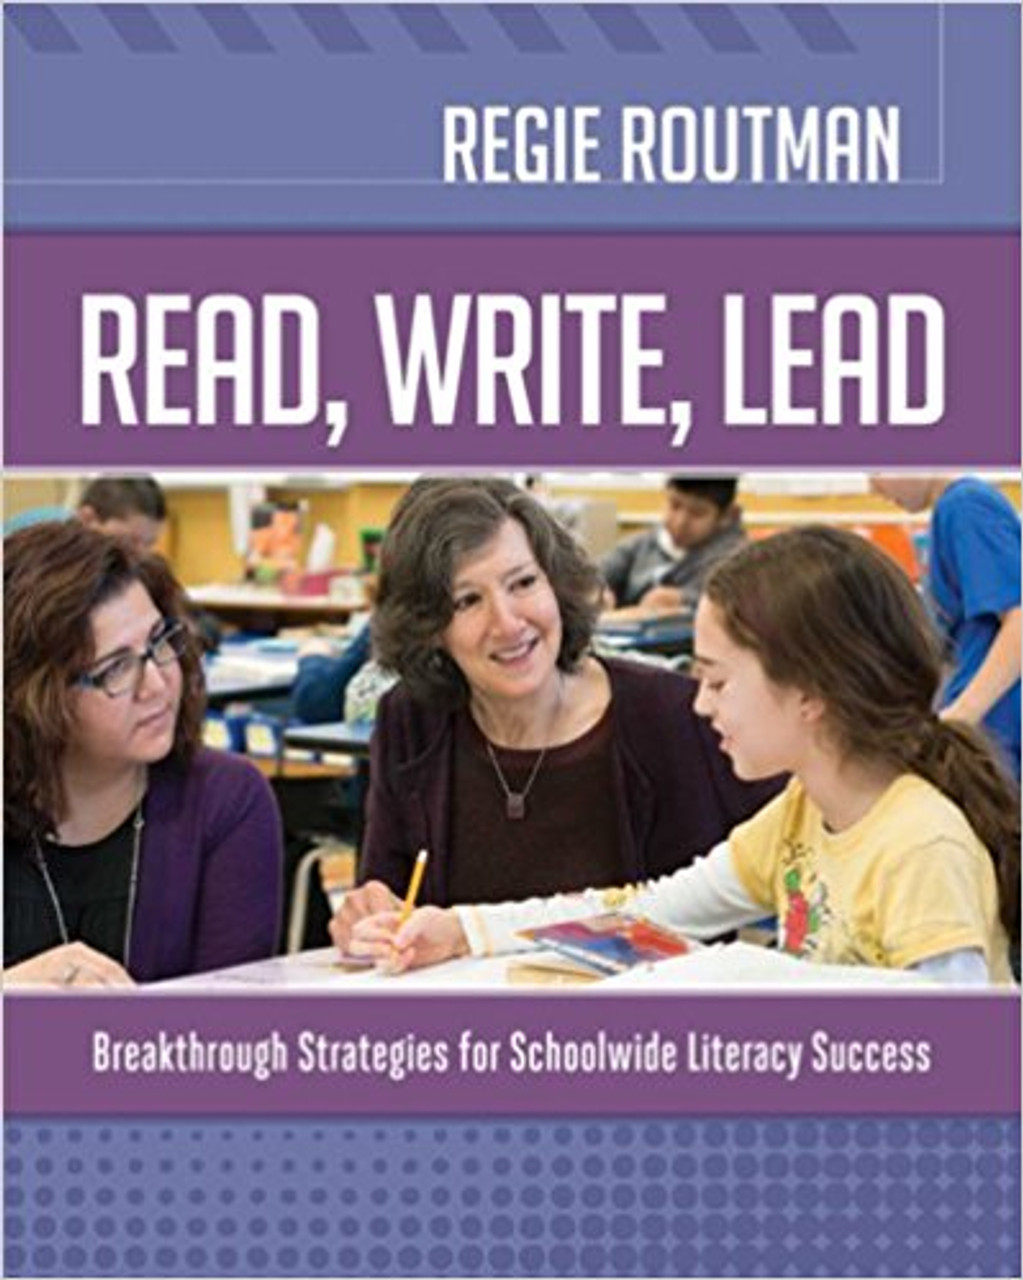 Achieve dramatic academic improvement by entwining successful practices of literacy and leadership in your school.